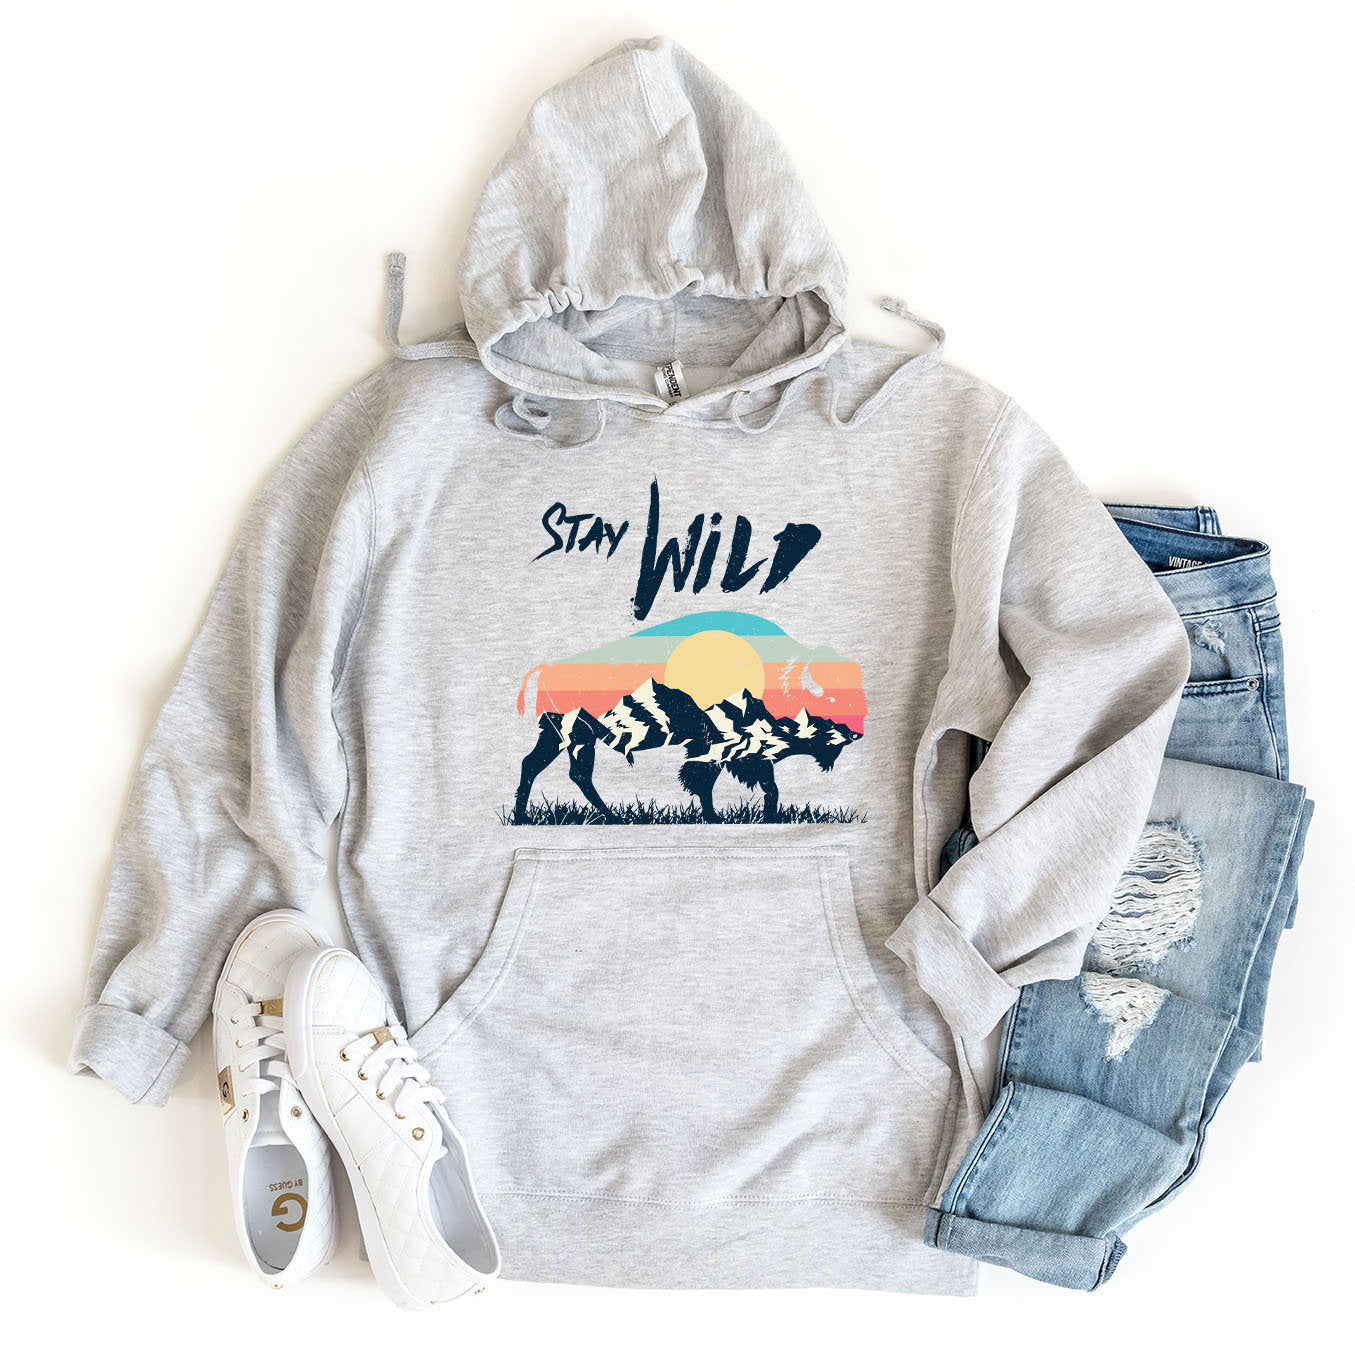 a sweatshirt with the words stay wild on it